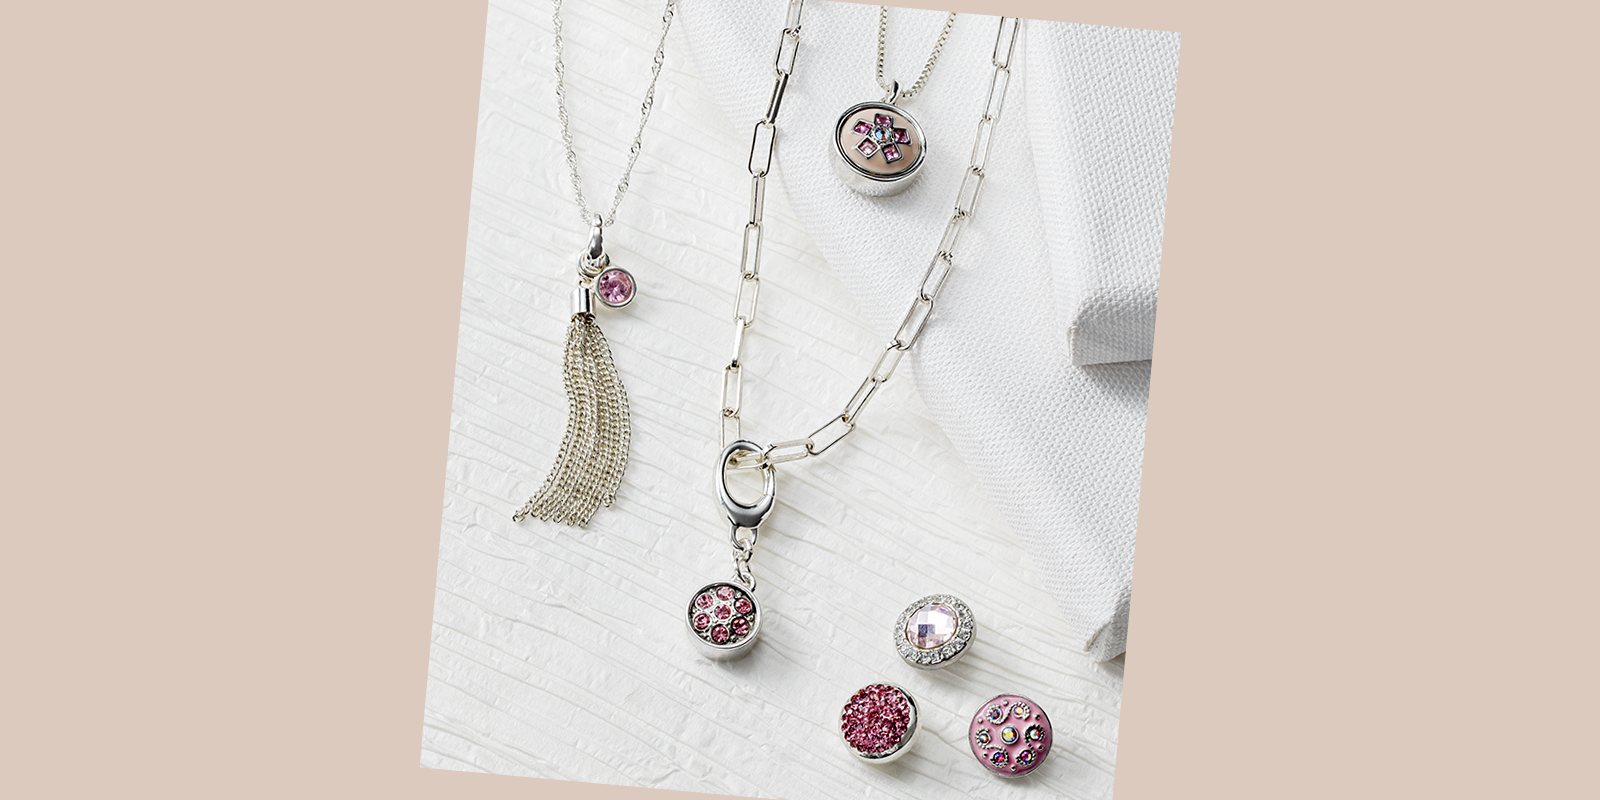 Affordable pink crystal jewelry from Style Dots